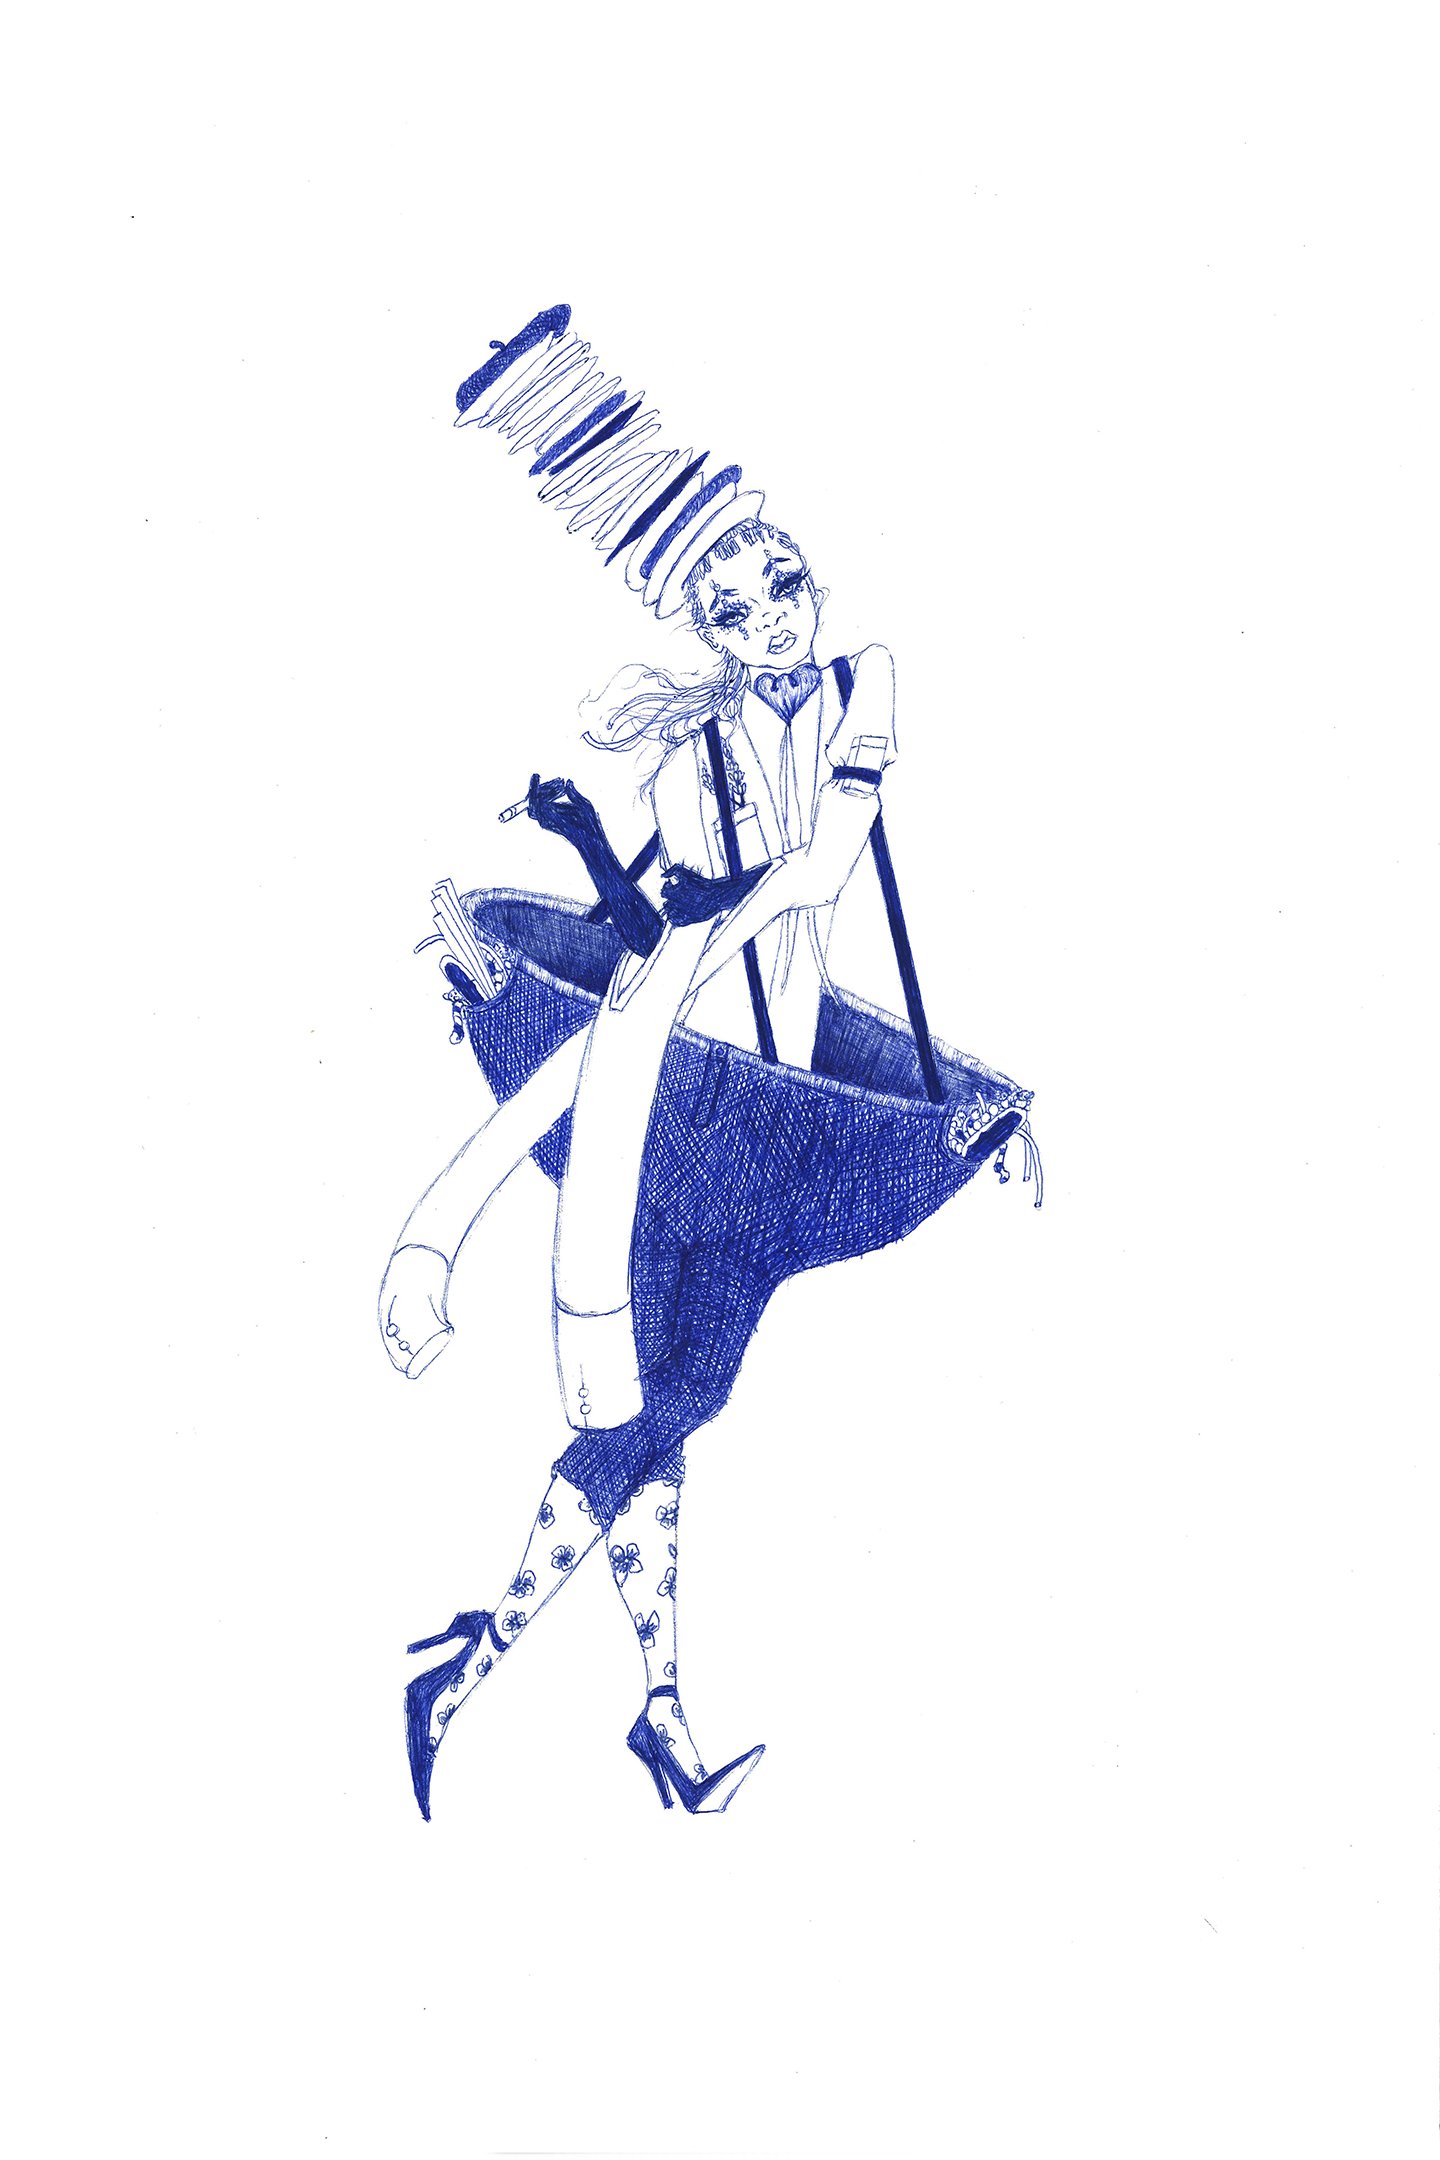  Lucy Balls, 2022 Blue pen on paper 12 x 18 inches  Anime drag community character design 